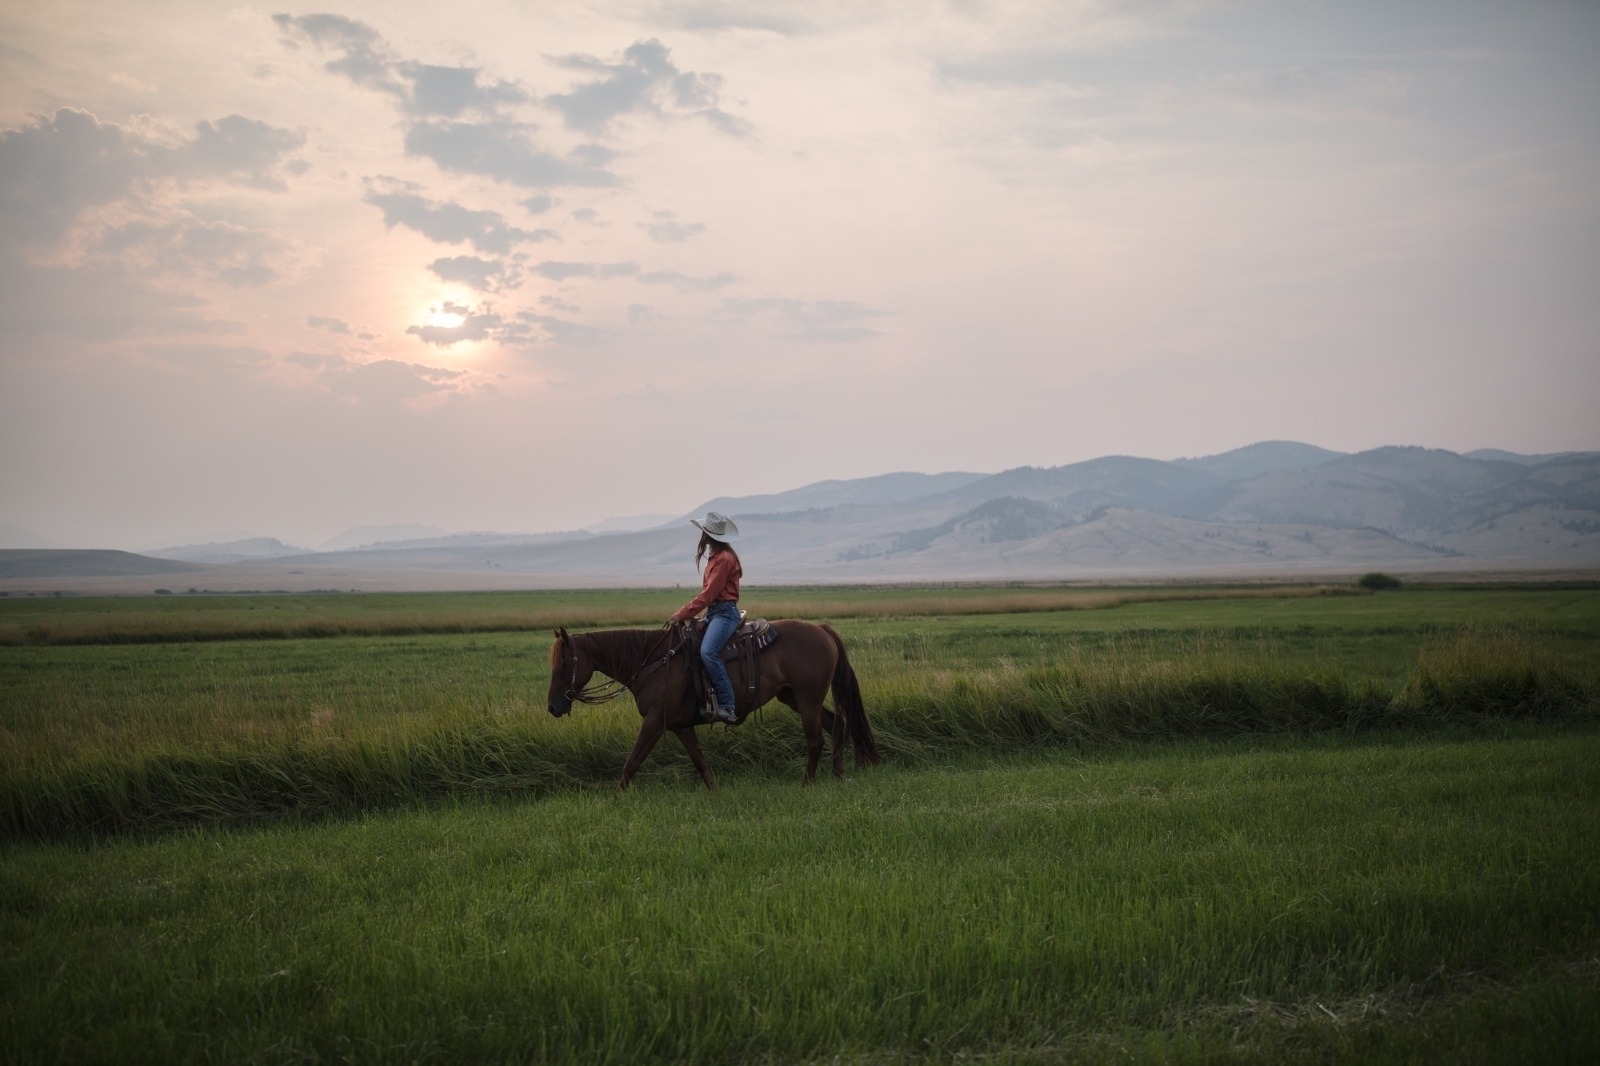 Irene Johnson rides her horse, Perky, on her home ranch under a smokey Montana sky. Photo by Louise Johns